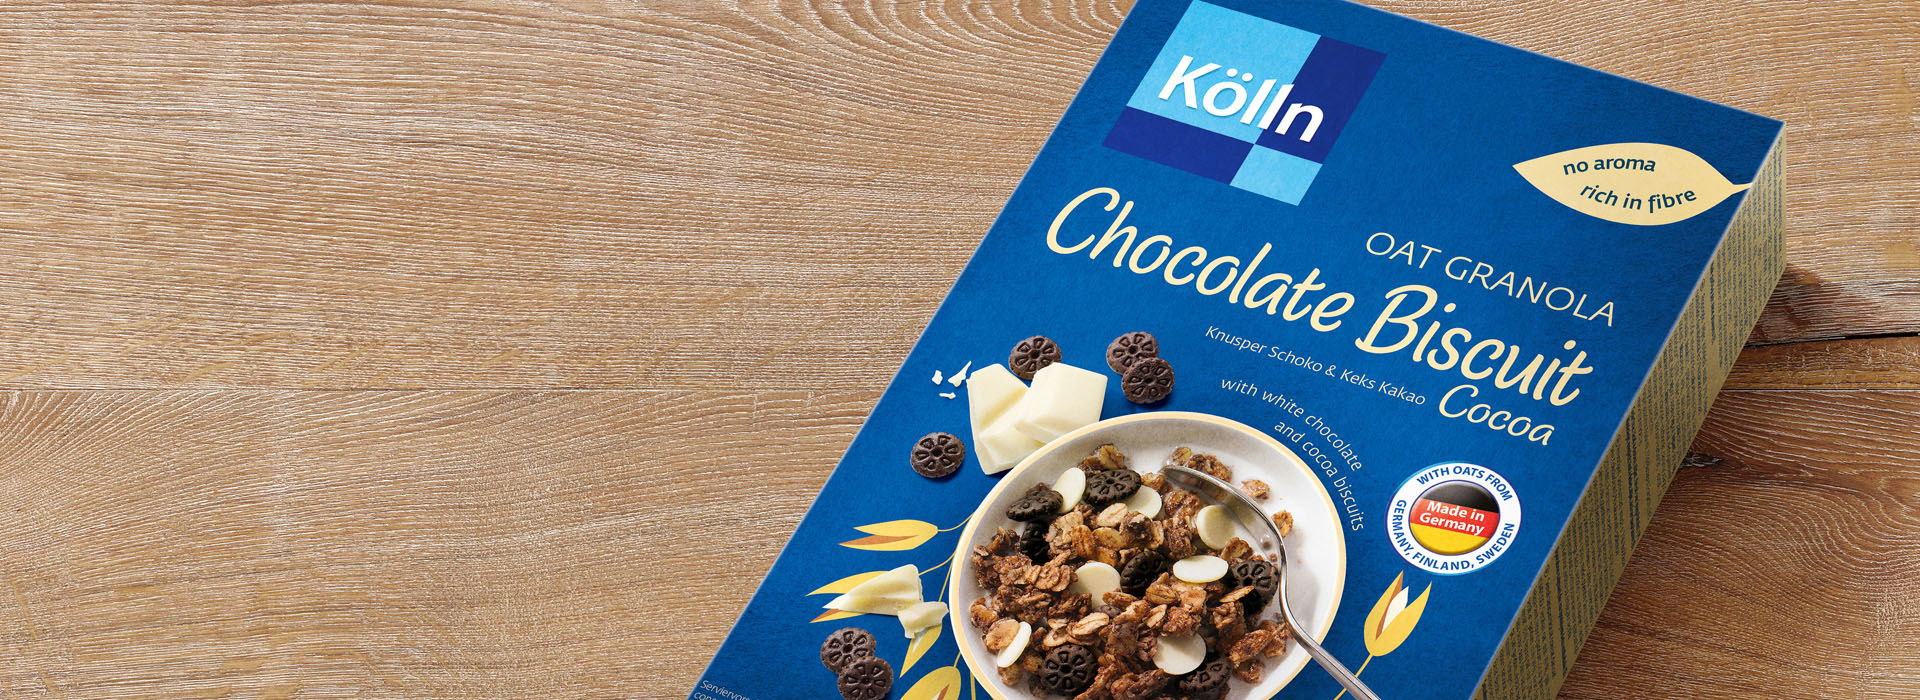 Koelln Oat Granola Chocolate Biscuit Cocoa Pack on Table